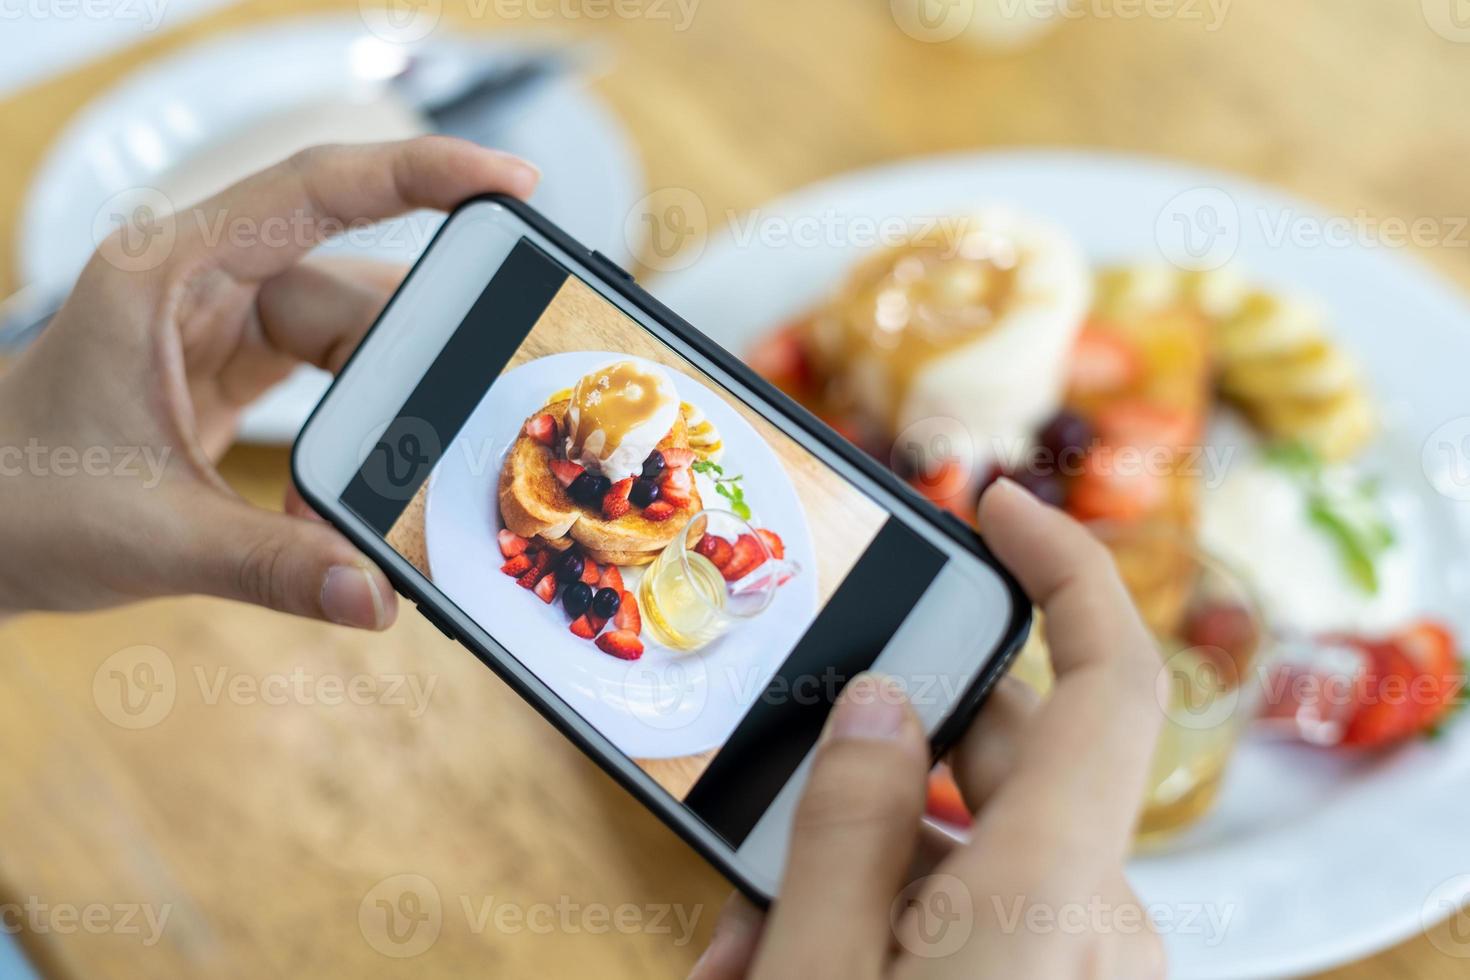 restaurant owner takes a picture of the food on the table with a smartphone to post on a website. Online food delivery, ordering service, influencer, review, social media, share, marketing, interest photo